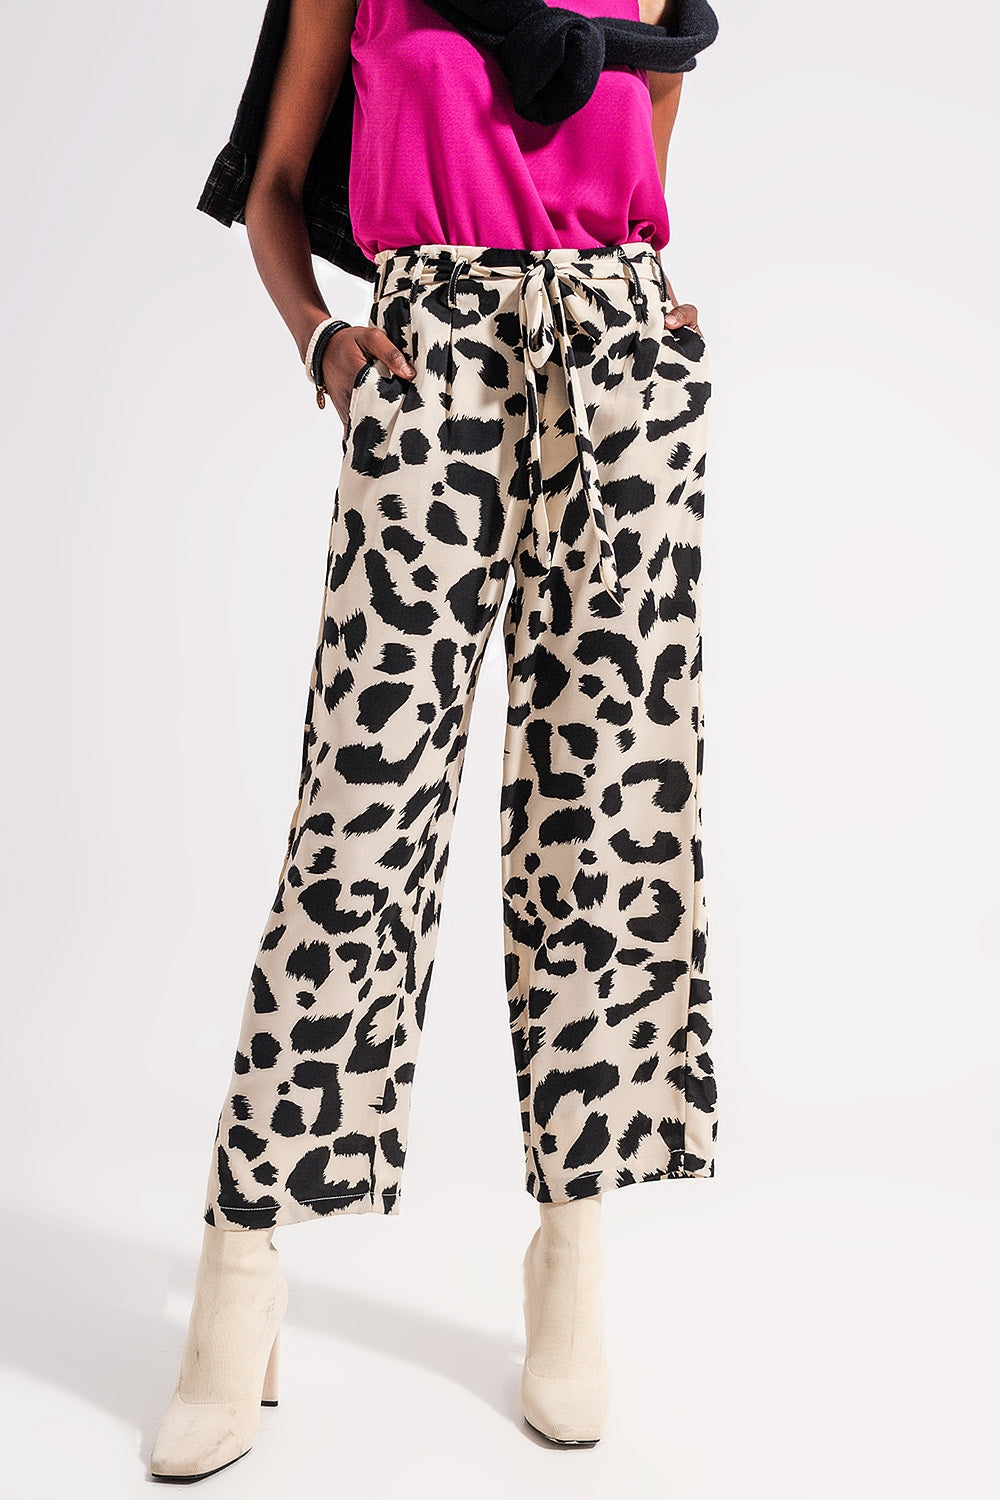 Relaxed trousers in cream animal print